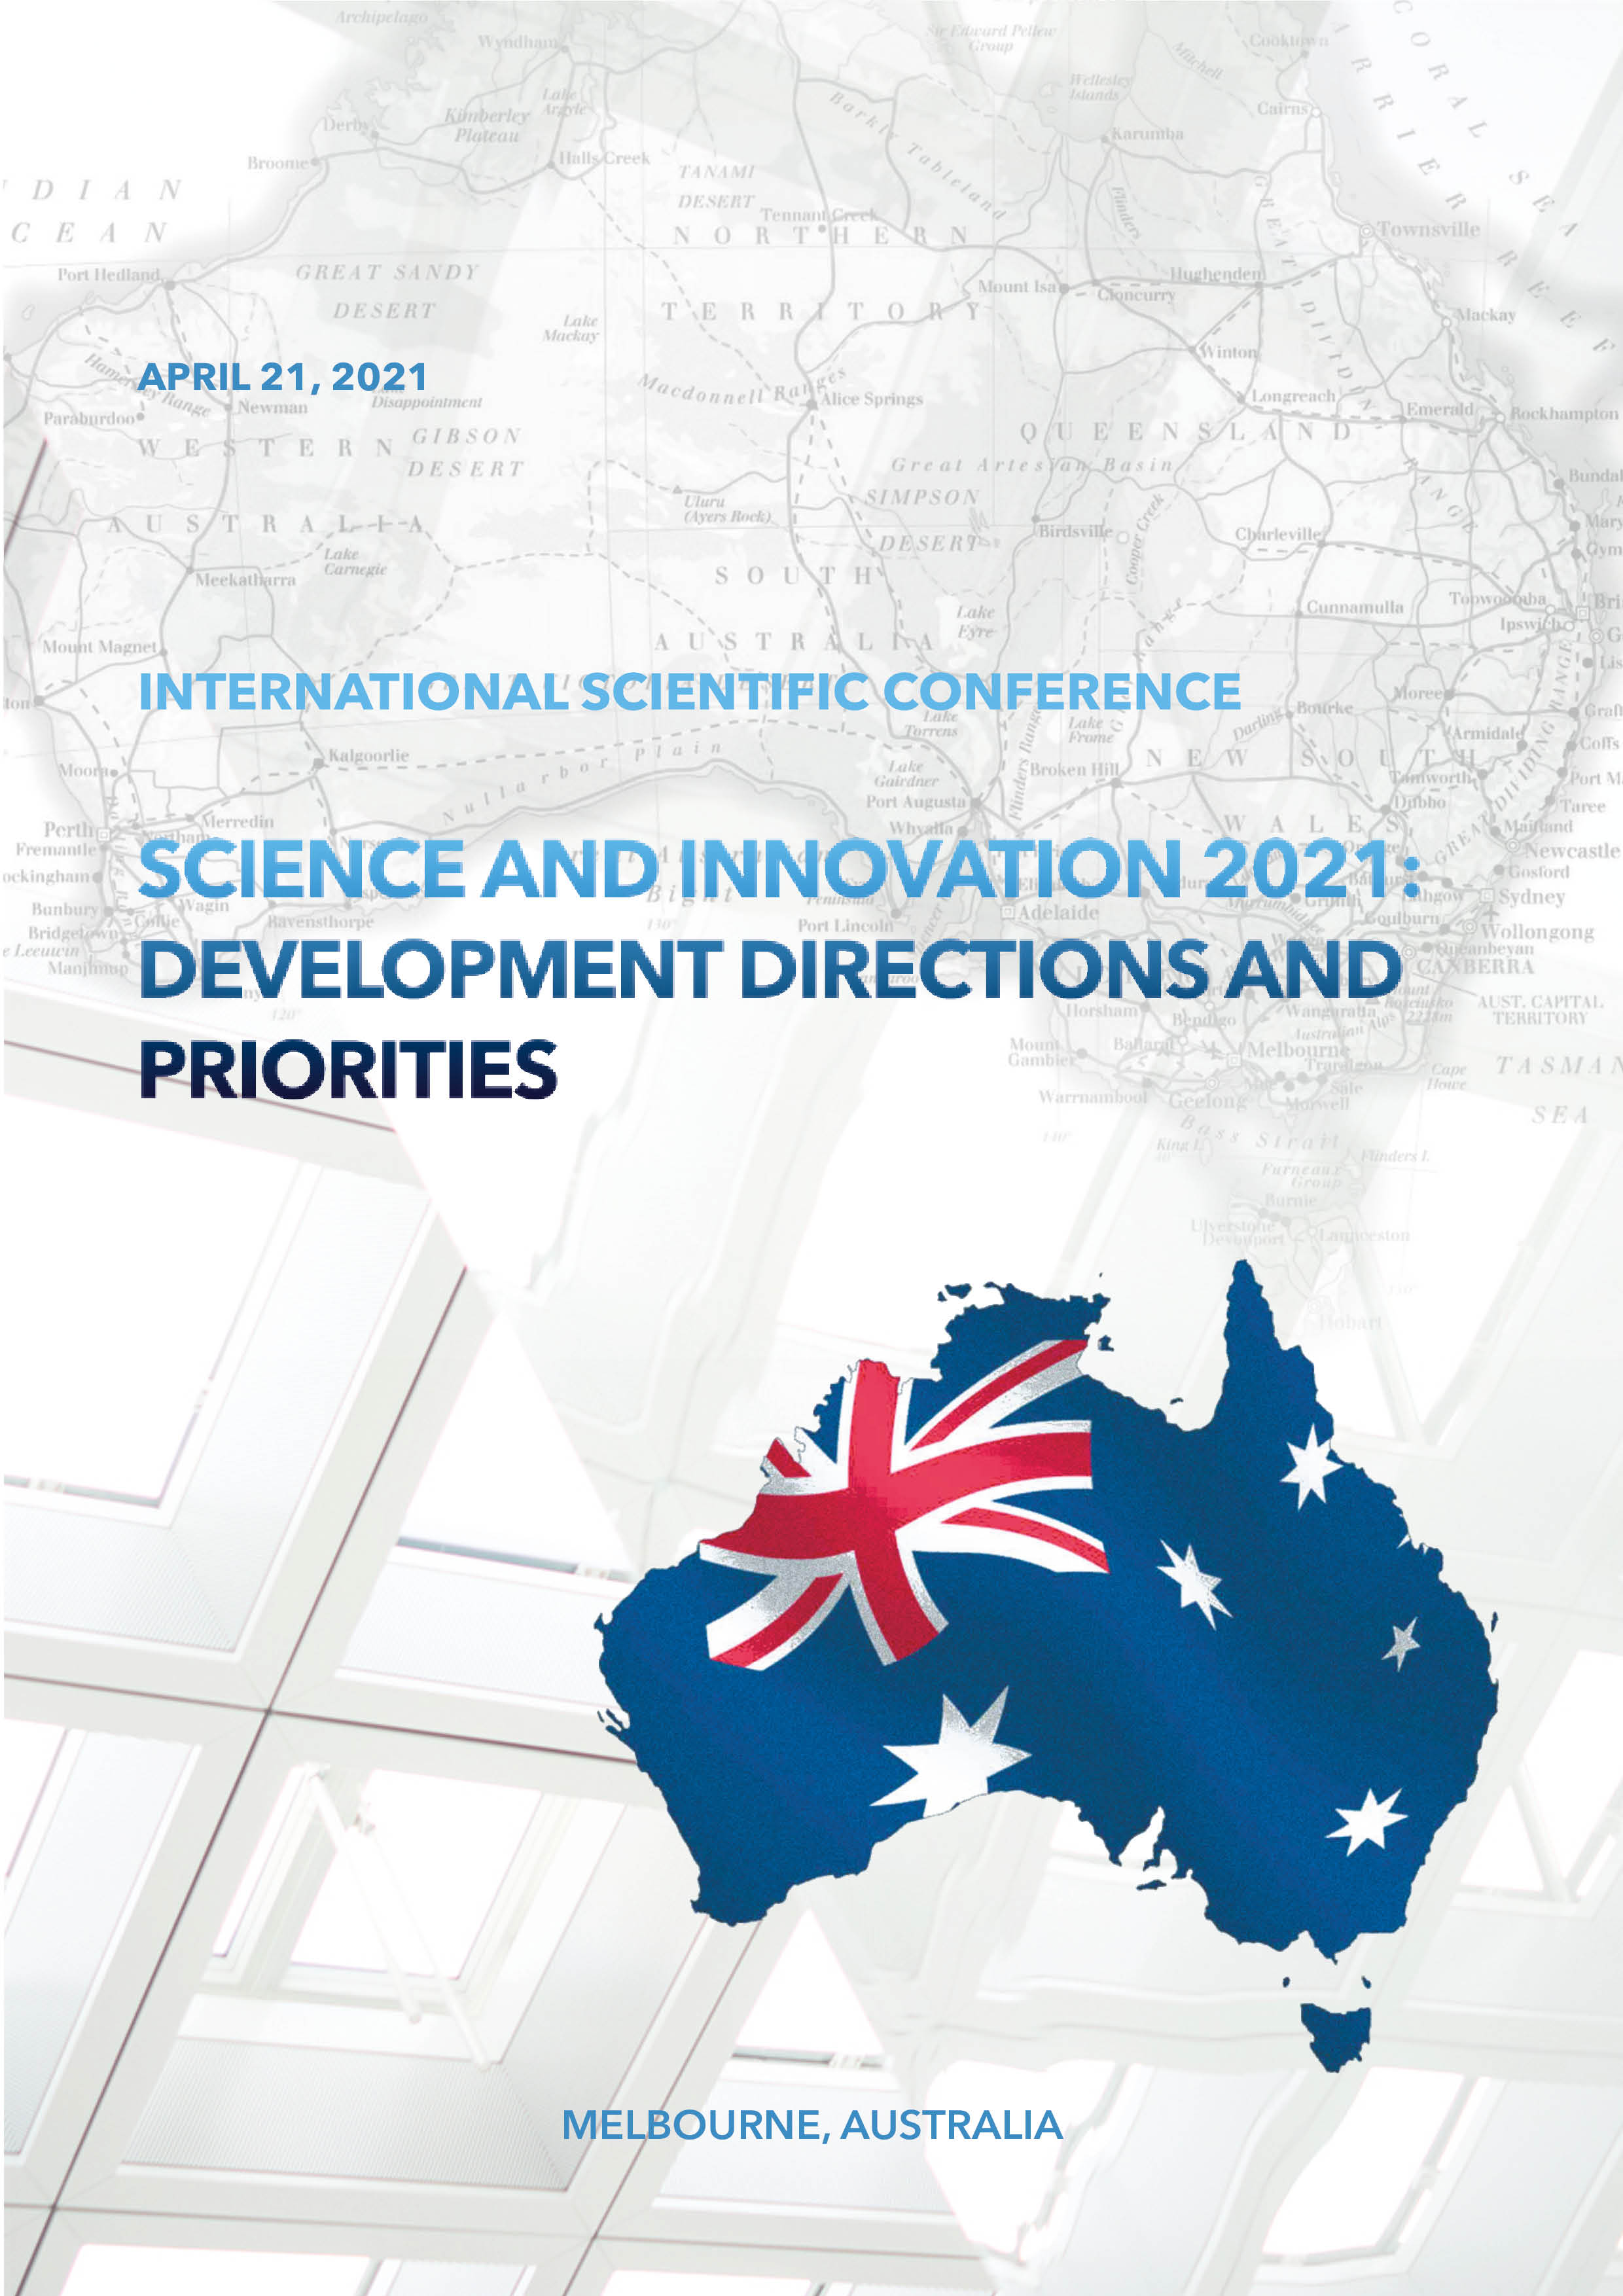                         Science and innovations 2021: development directions and priorities. Part 2
            